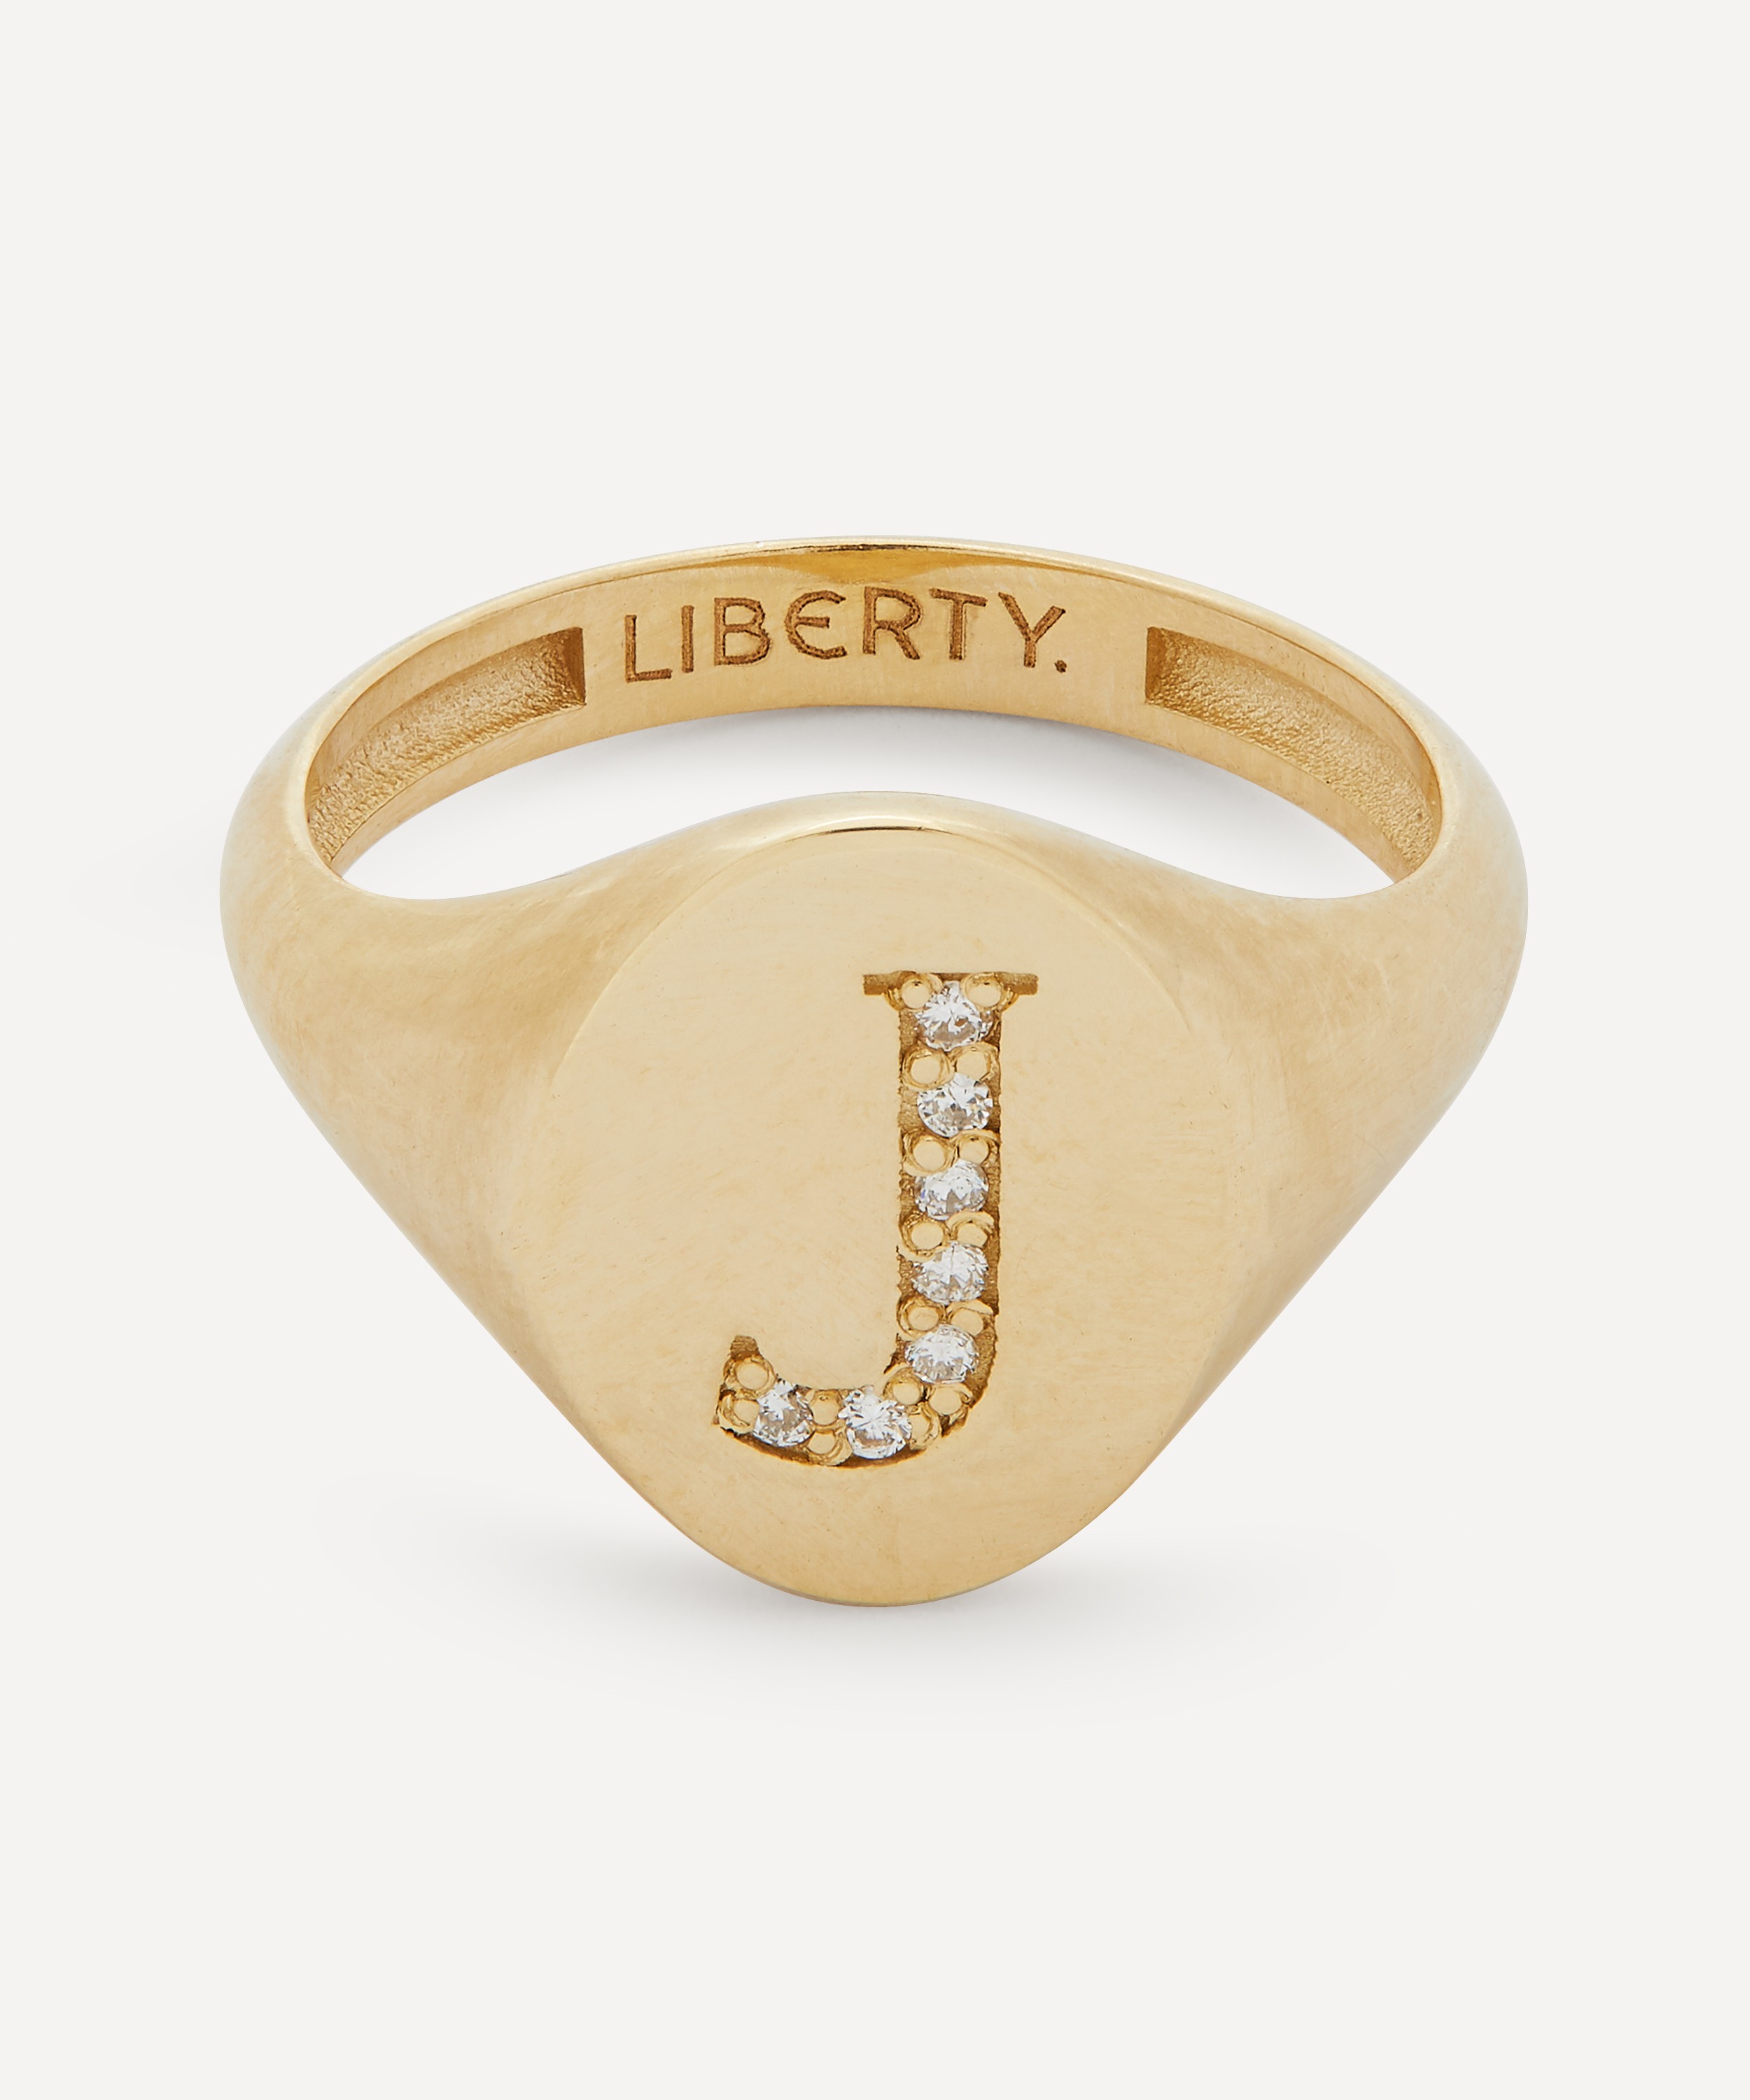 Liberty - 9ct Gold and Diamond Initial Liberty Signet Ring - J image number 0